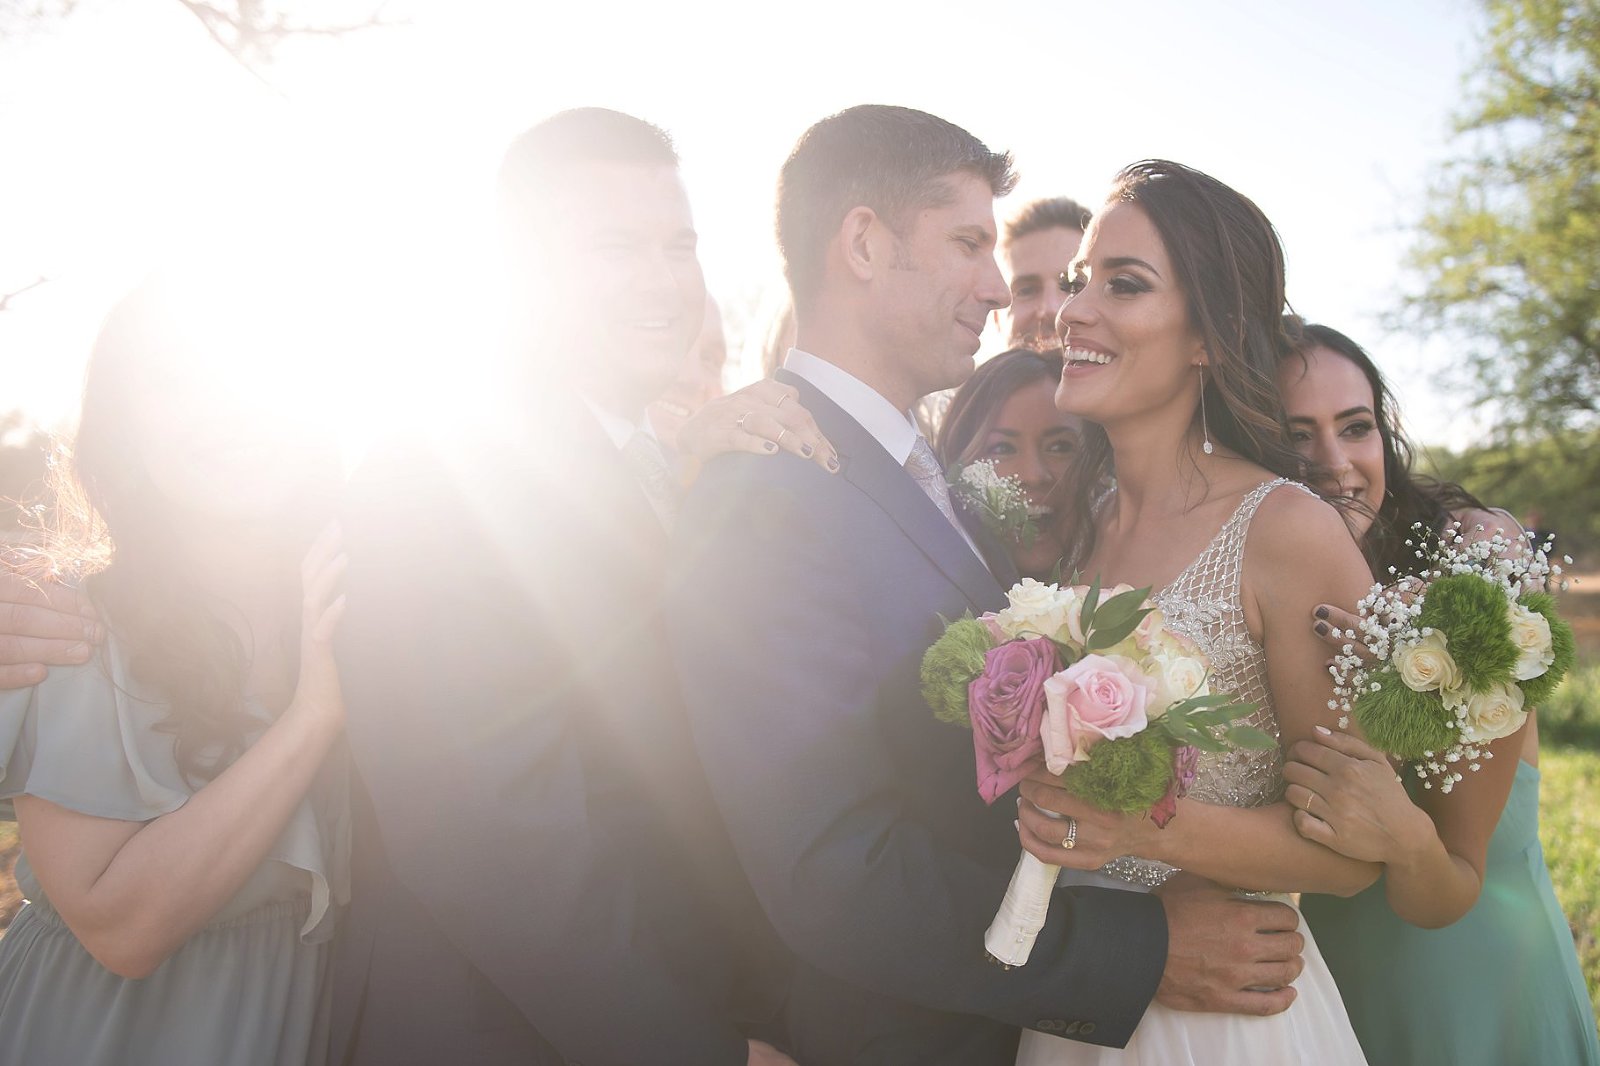 Bridal party hugging bride and groom after ceremony with lens flare